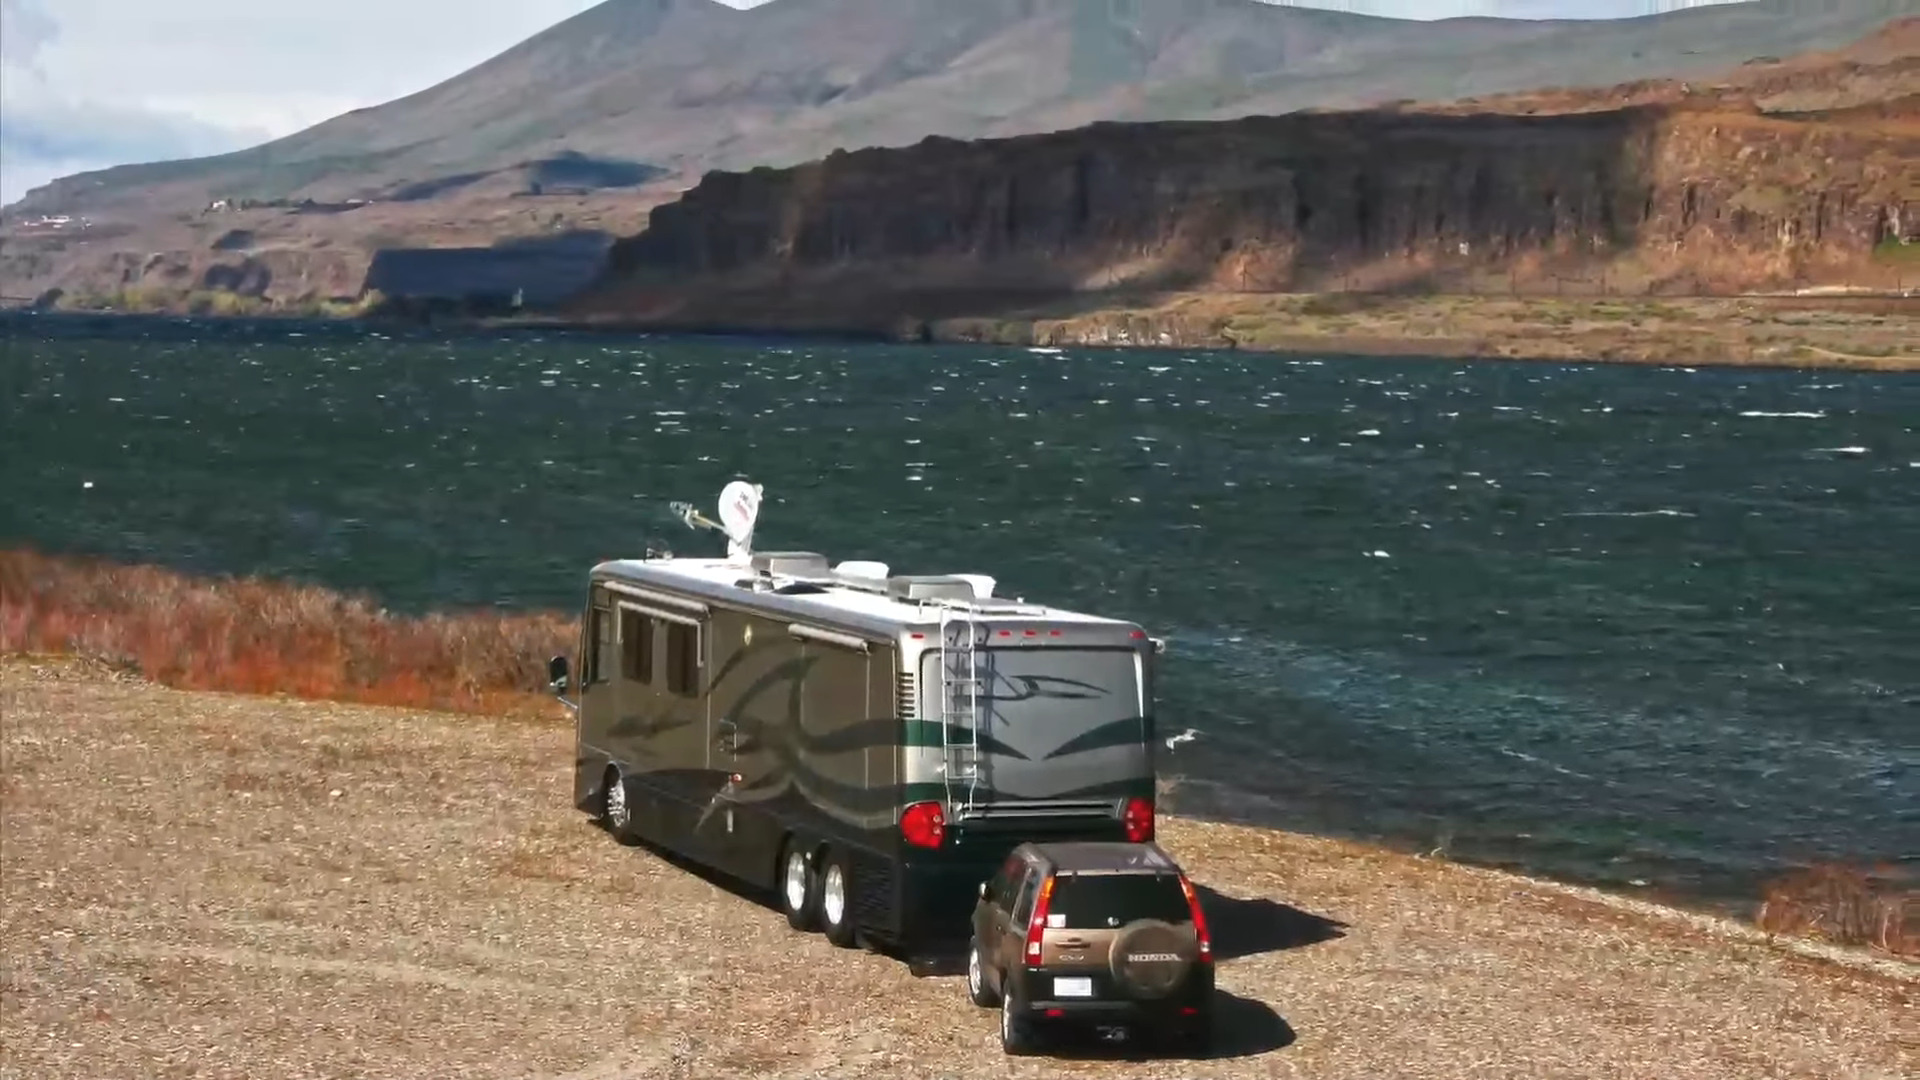 You can save on your full-time RV living expenses by boondocking in places like this spot along the Columbia River.